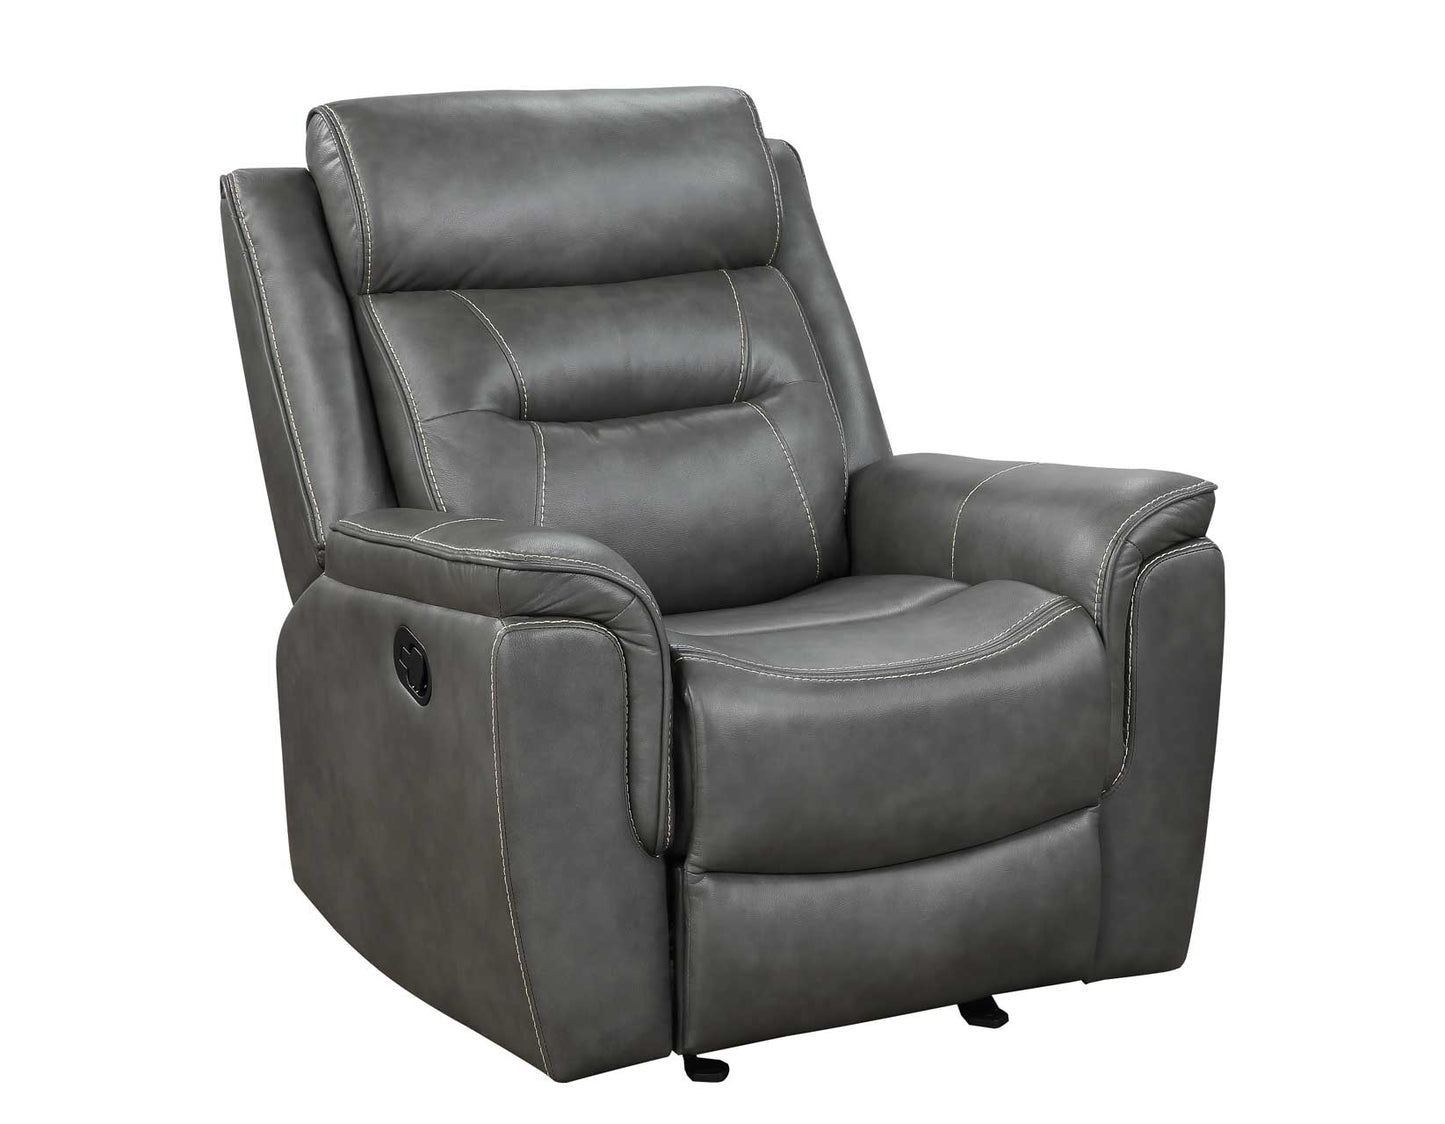 WEEKLY or MONTHLY. Nash Manual Glider Recliner